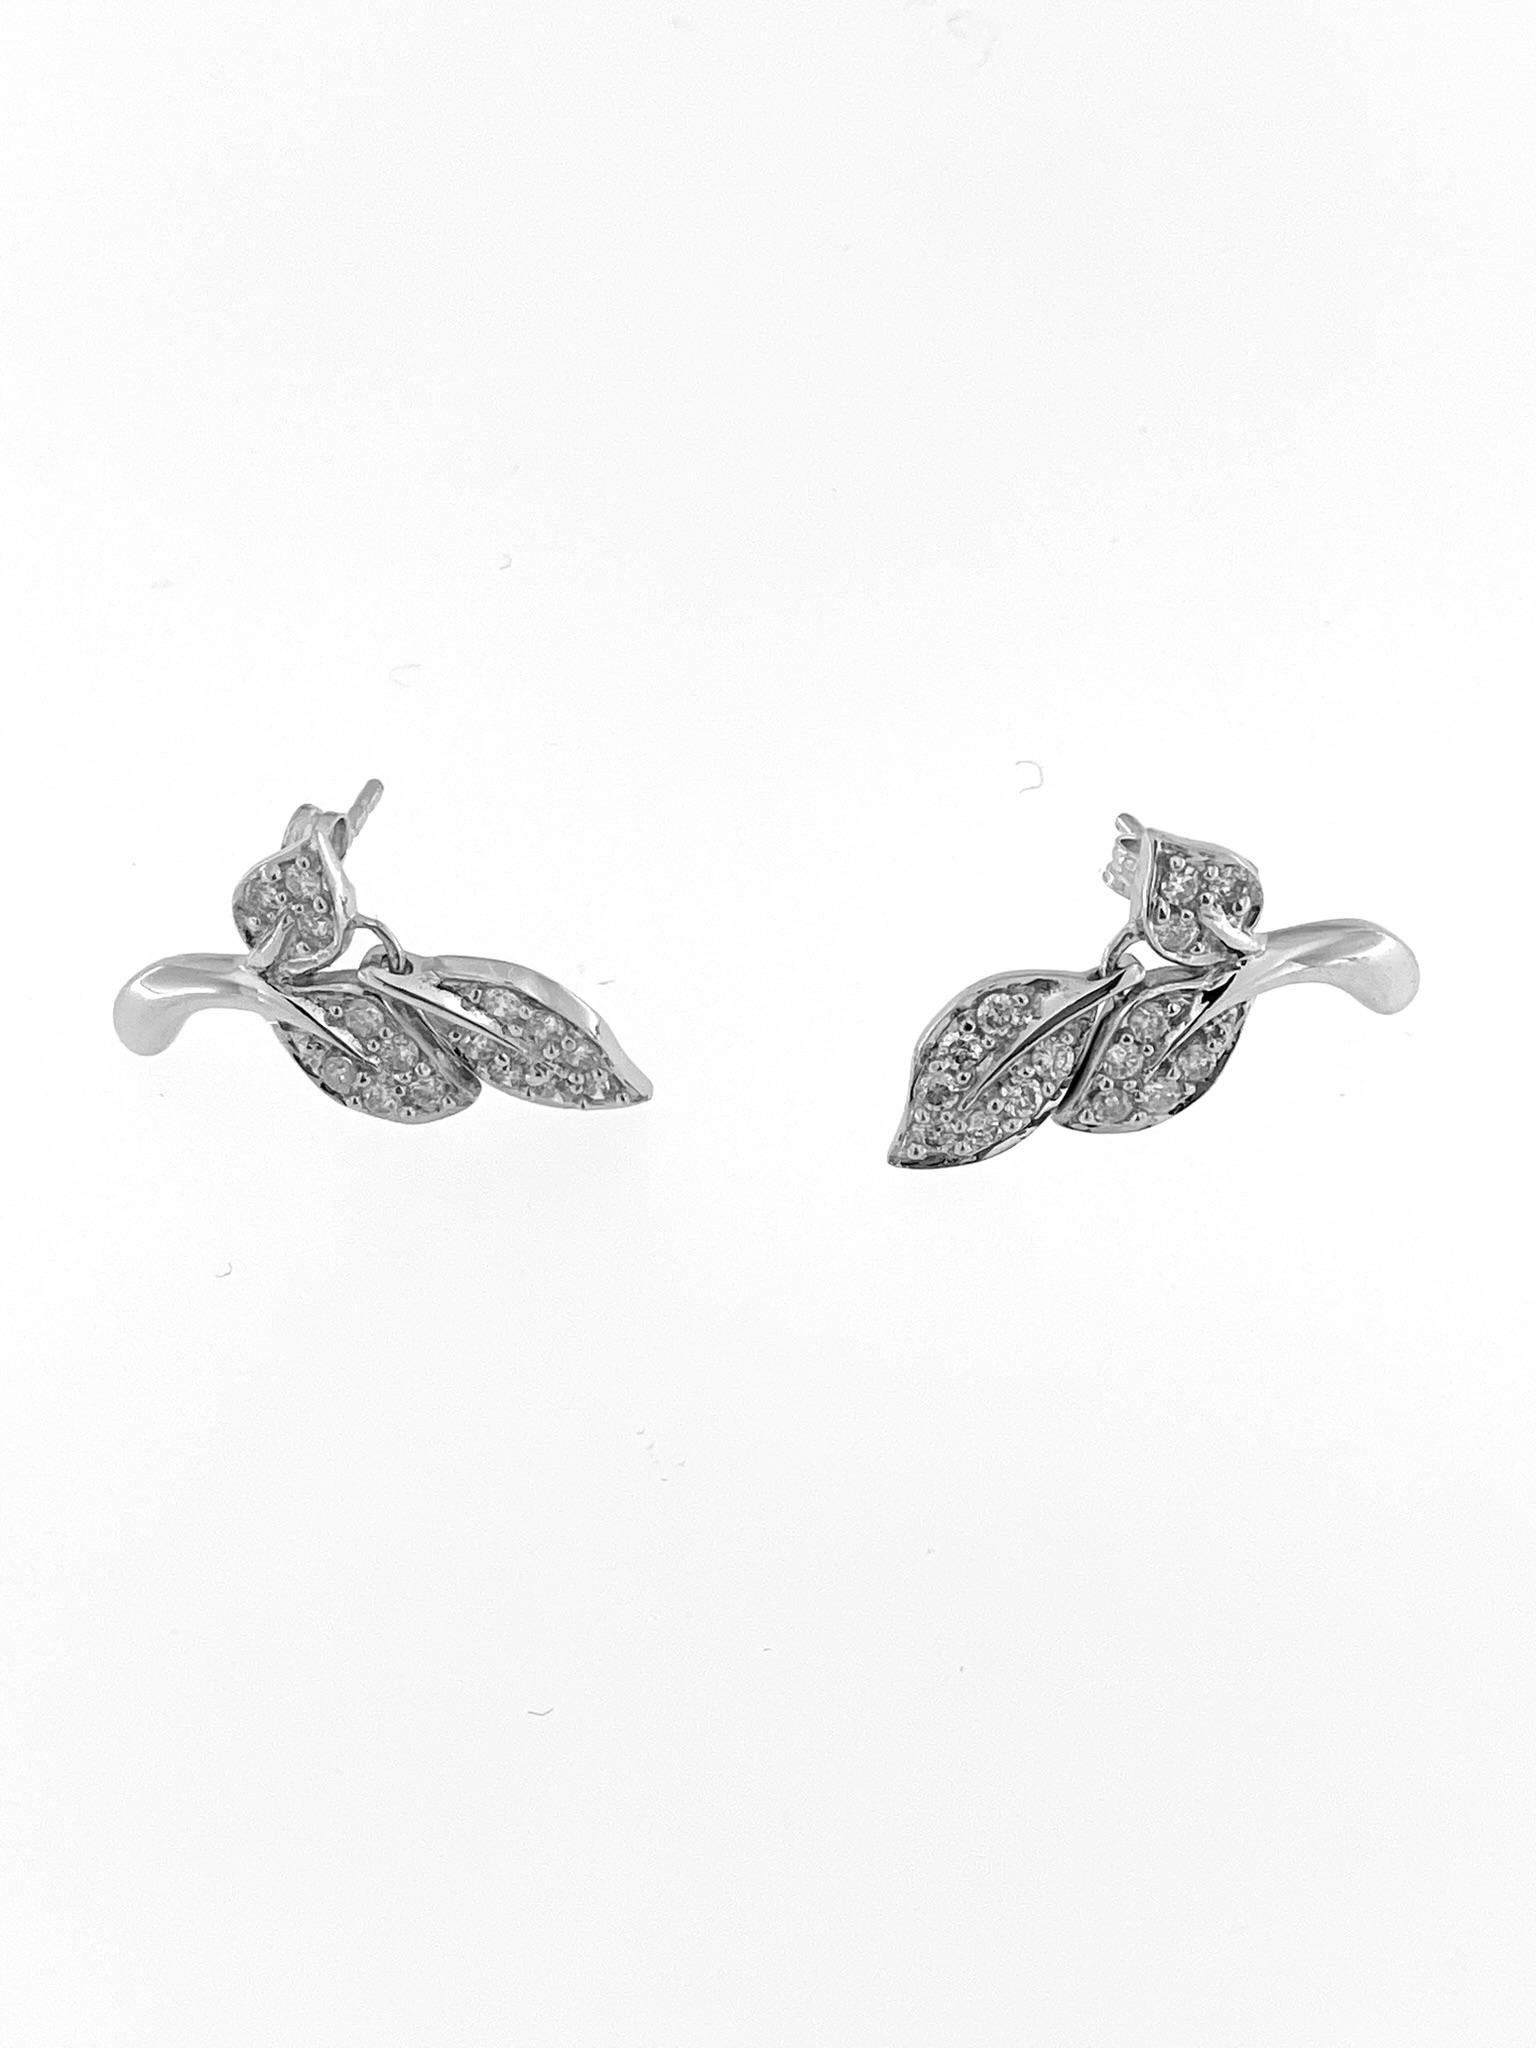 Modern Earrings and Ring Leaf Design Set White Gold and Diamonds In Excellent Condition For Sale In Esch-Sur-Alzette, LU